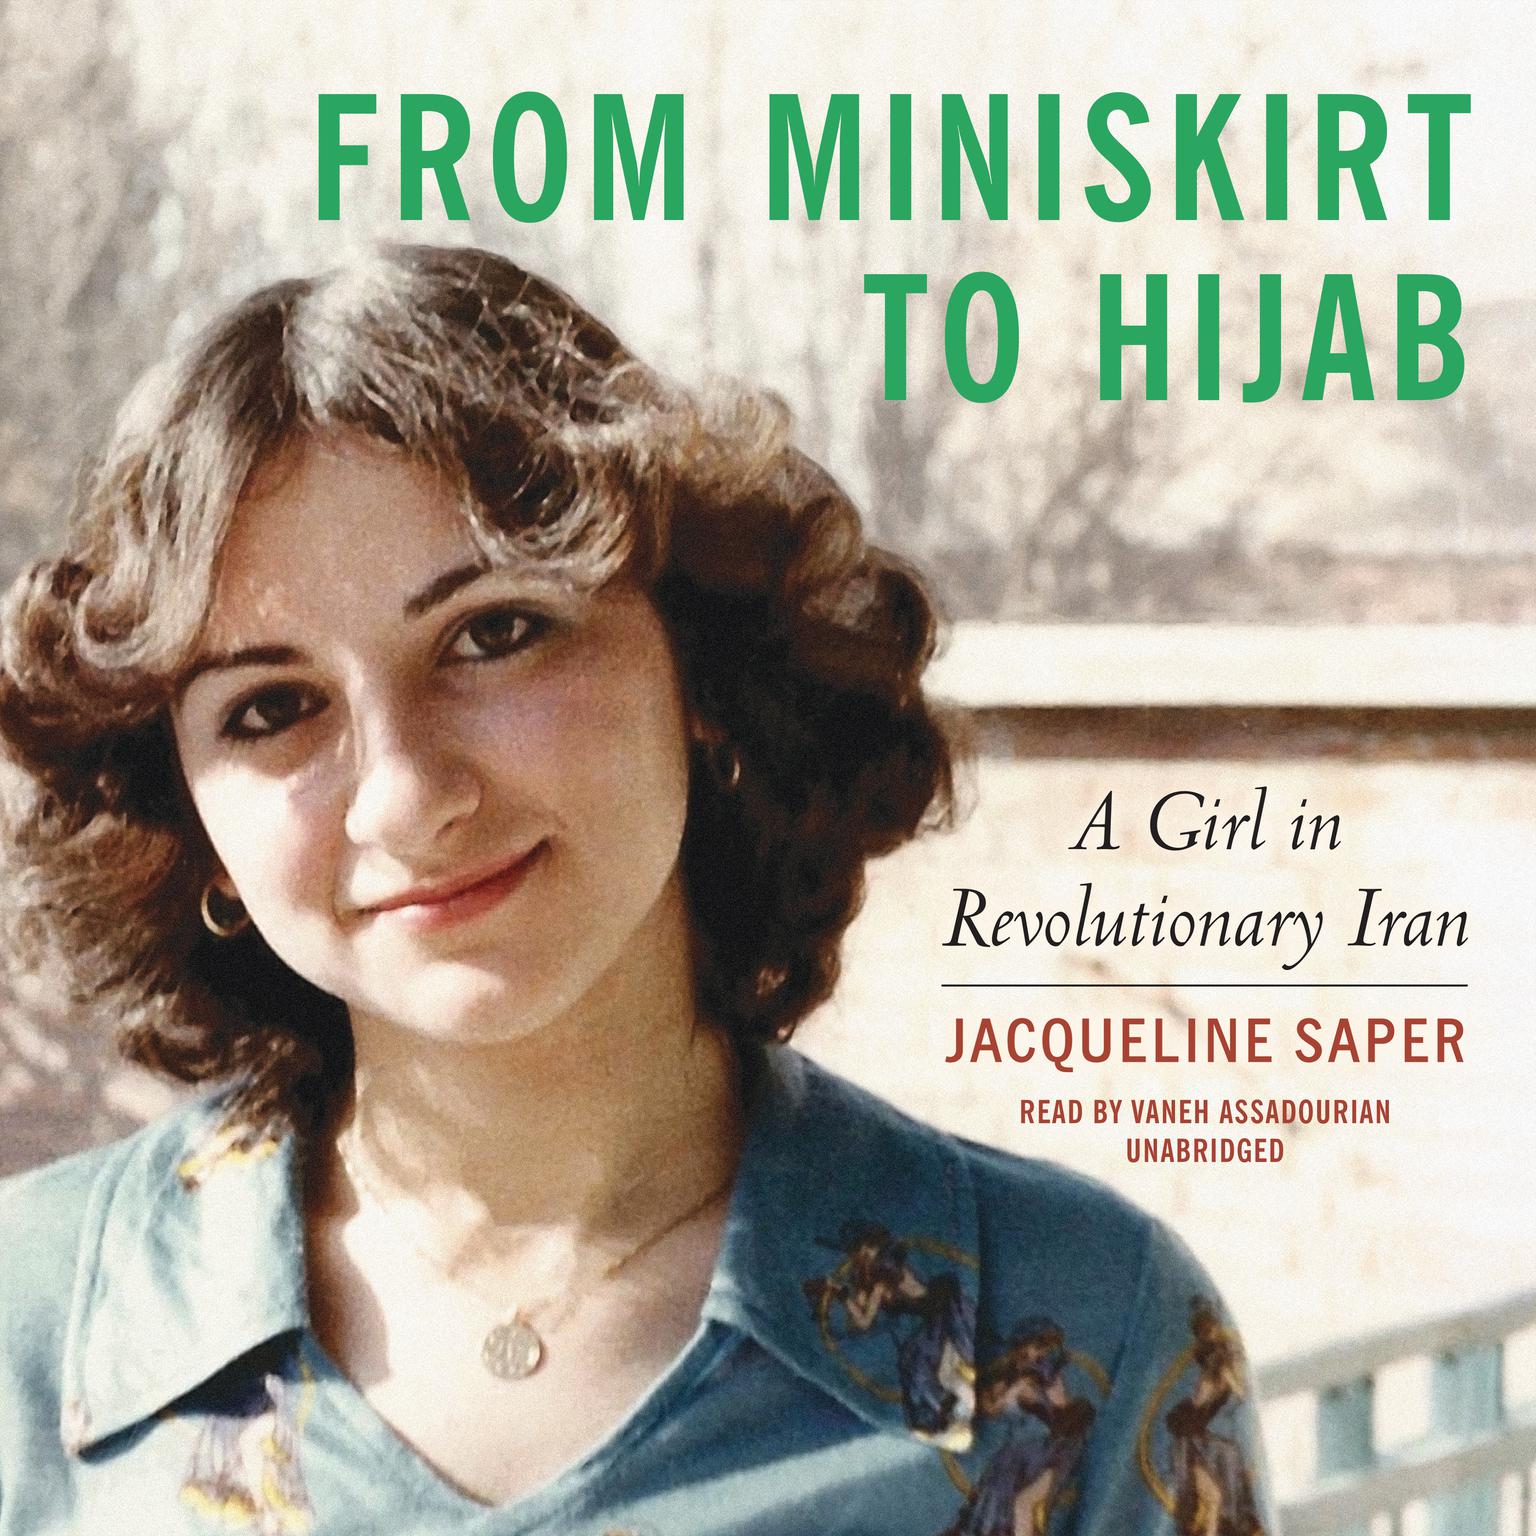 From Miniskirt to Hijab: A Girl in Revolutionary Iran Audiobook, by Jacqueline Saper